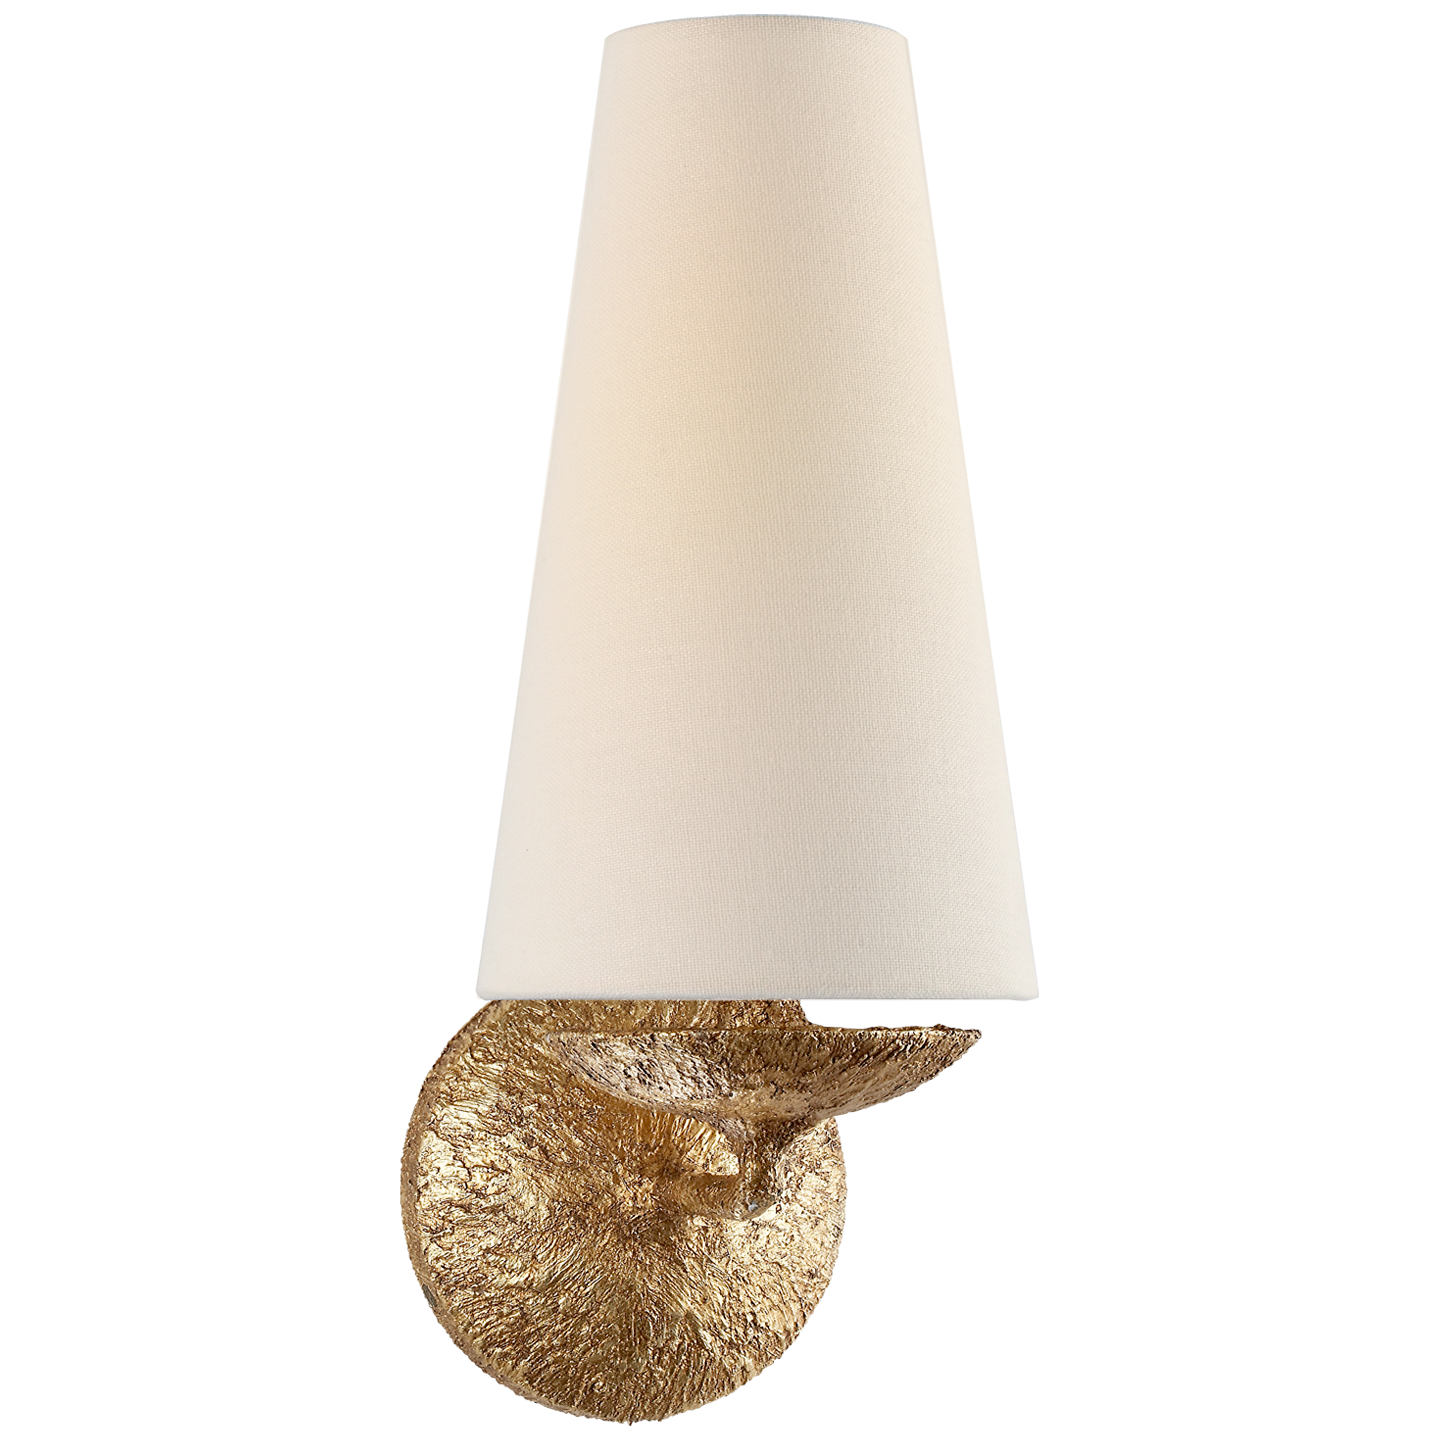 The linen shade of this Fontaine Single Sconce sheds a soft, warm glow. This looks gorgeous placed in a living room, hallway, or other area needing extra light.   Designer: AERIN